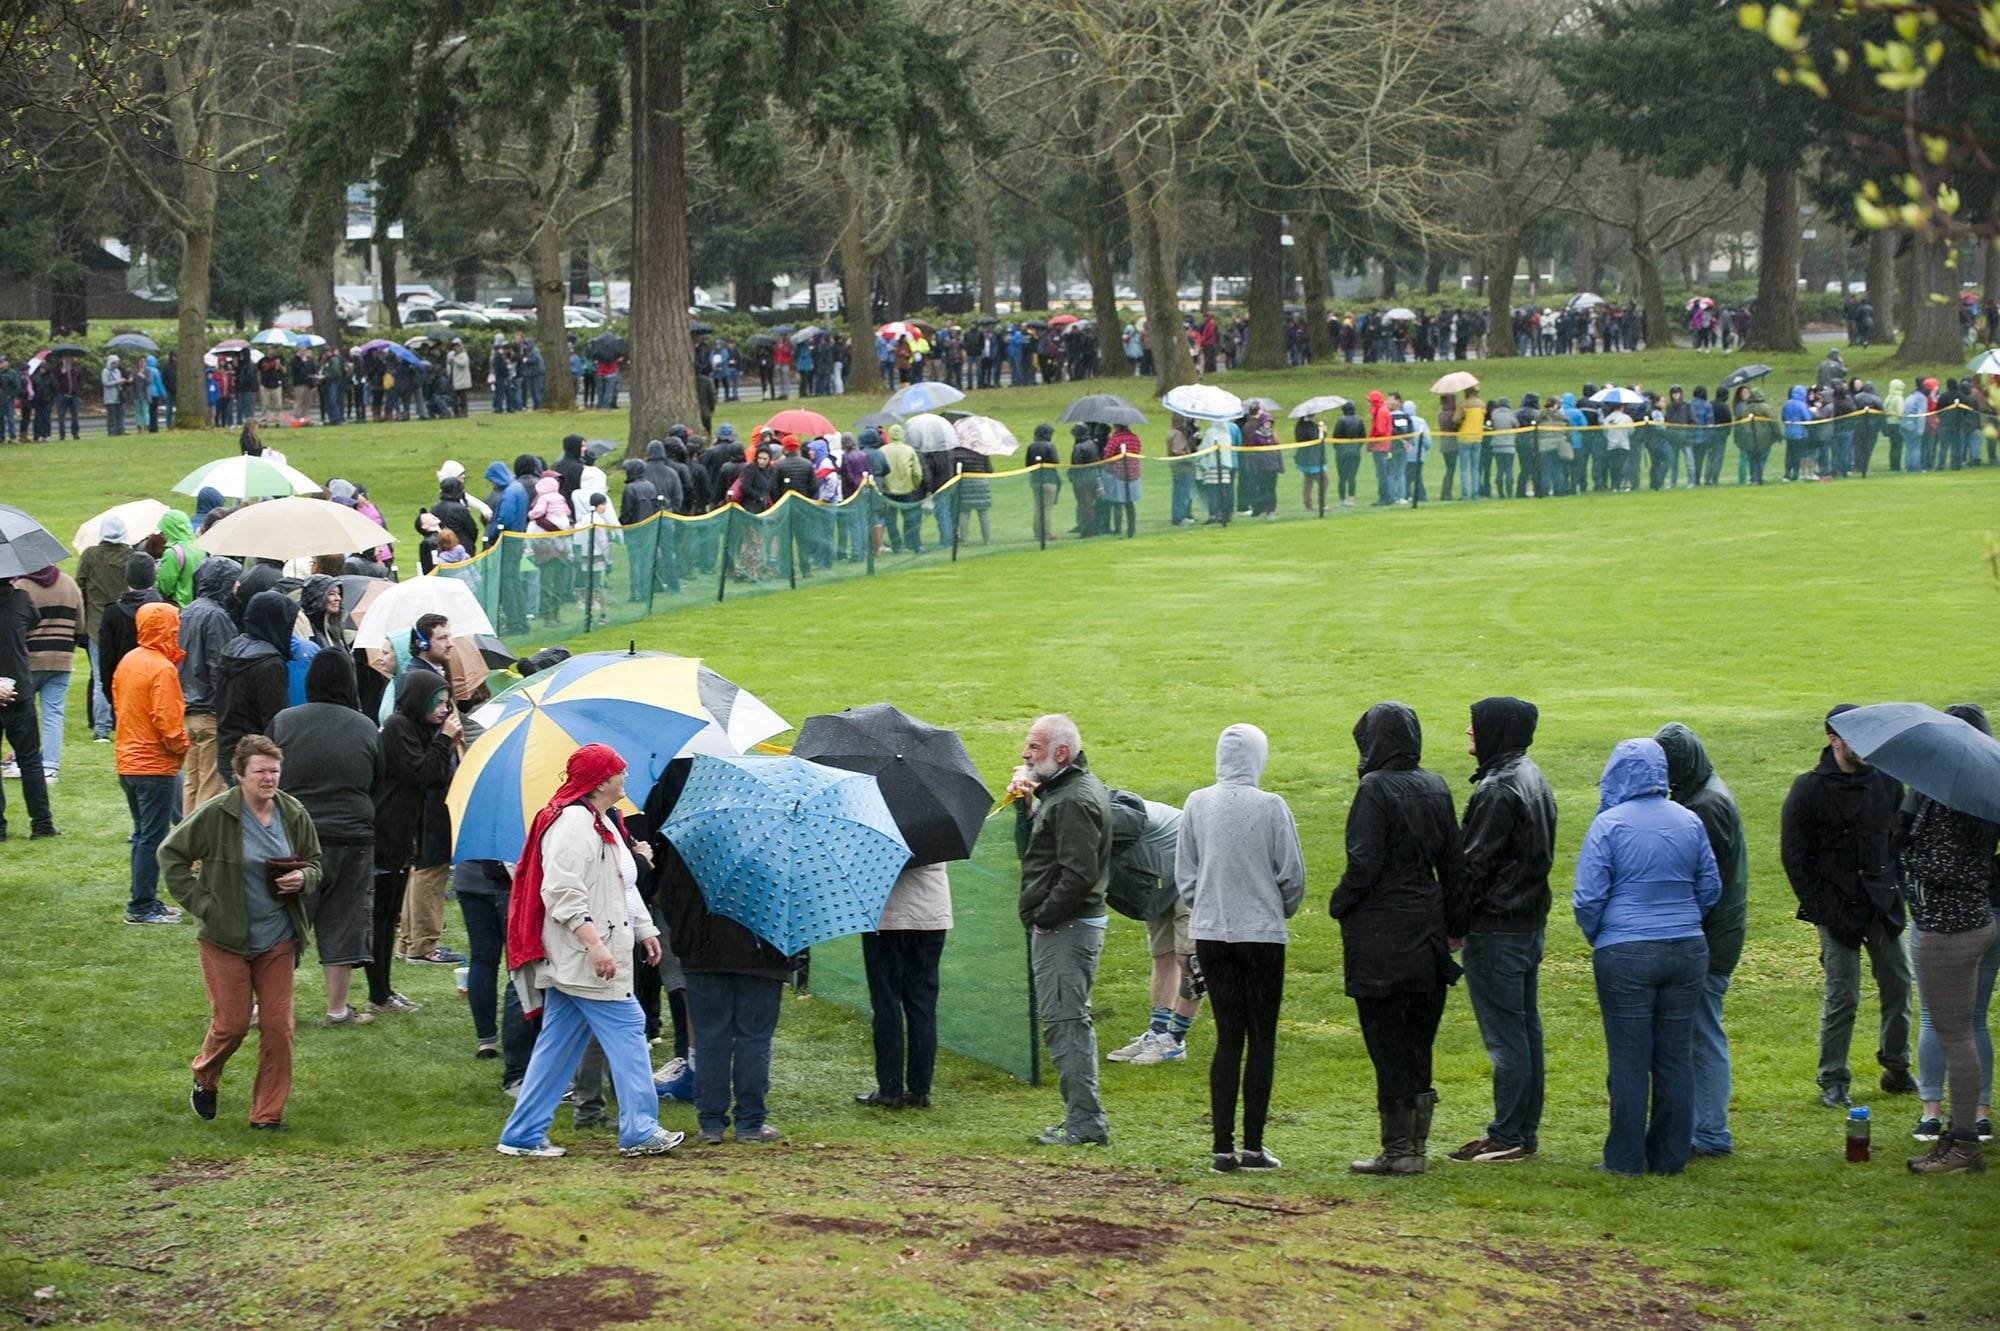 People waited in long lines for a chance to attend a rally of Democratic presidential candidate Bernie Sanders at Hudson's Bay High School in Vancouver Sunday March 21, 2016.